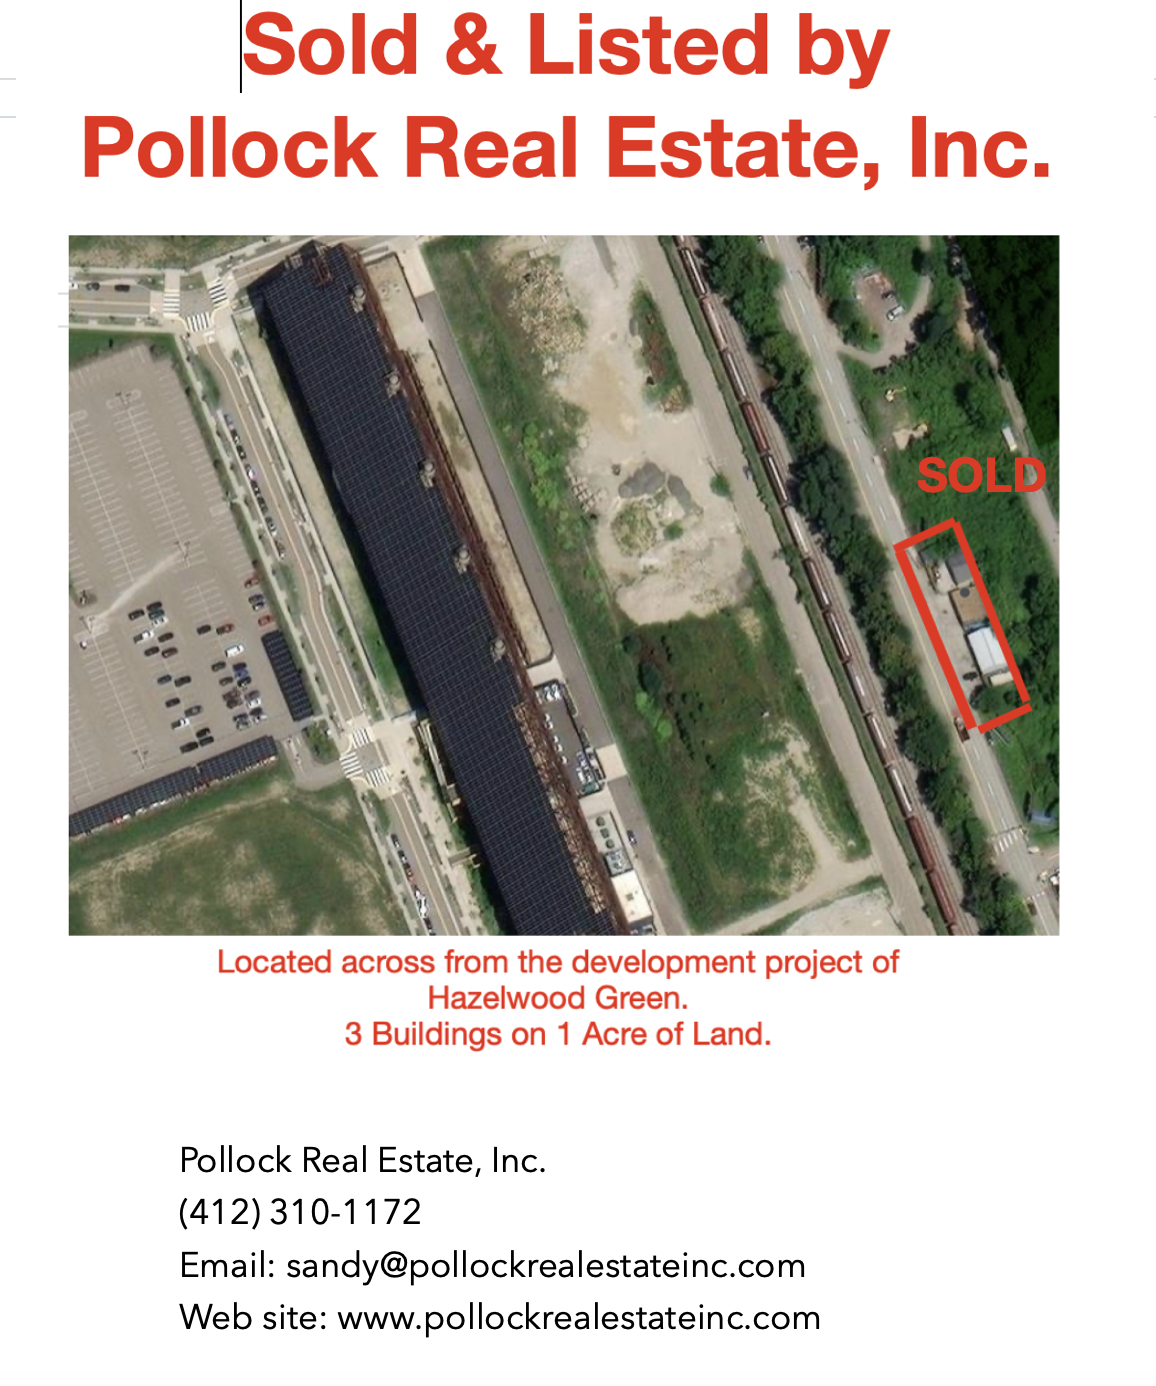 Listed and Sold 3 buildings on one acre located at major development - Three industrial buildings on 1 acre of land. Sold/...